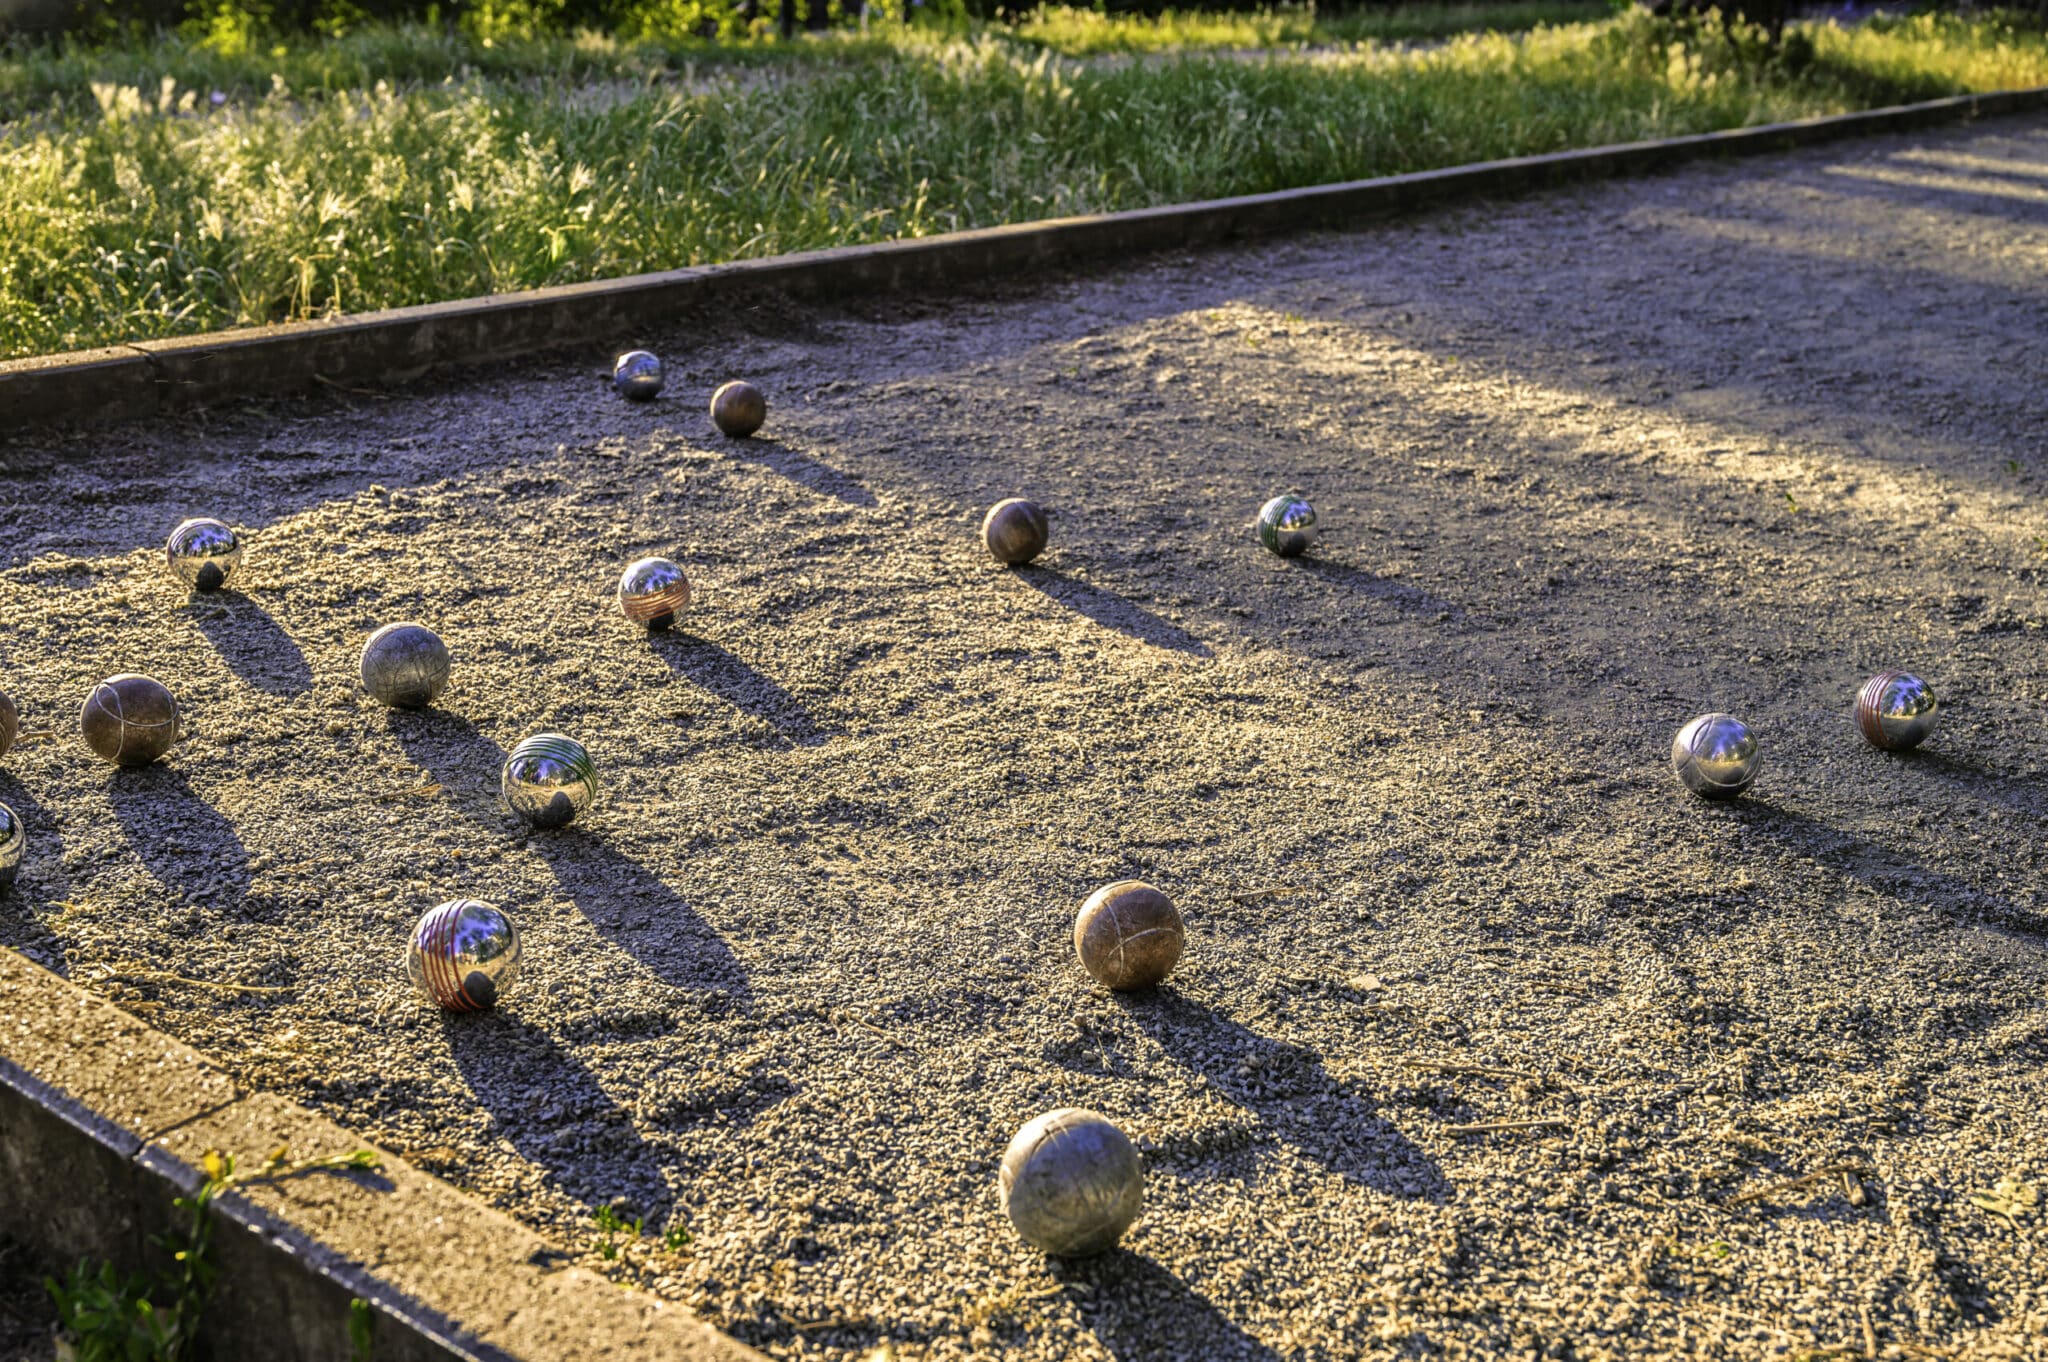 Photo of a playing field for boules in a public park in the middle of Berlin at dusk.